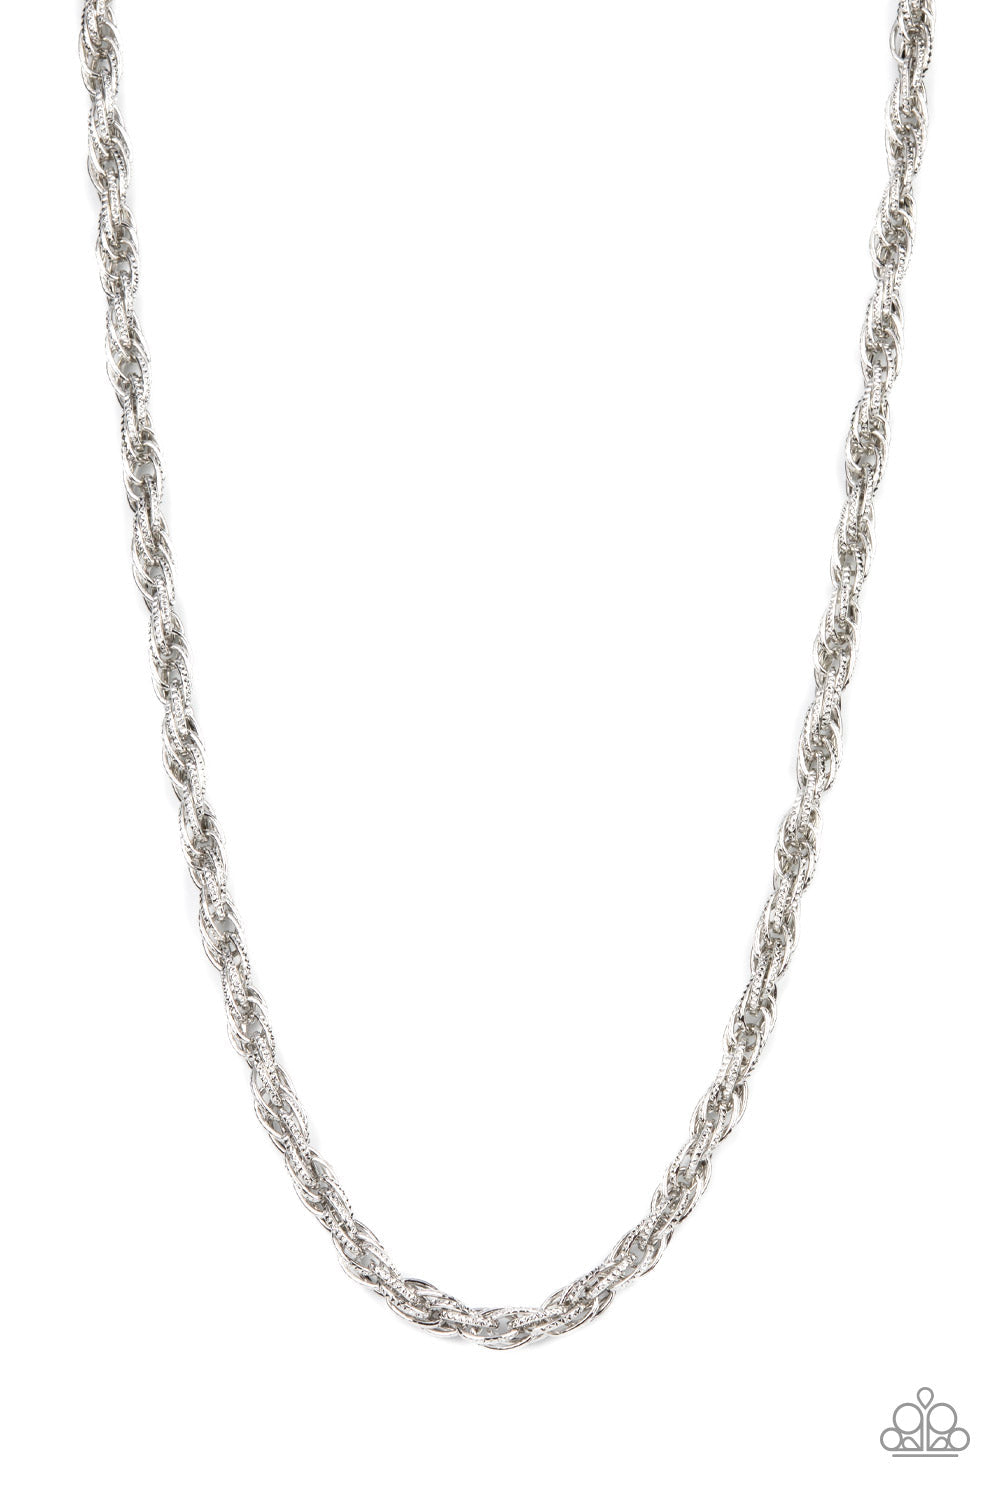 Paparazzi Accessories Pit Stop - Silver Featuring diamond cut edges, oval silver links triple-link across the chest, resulting in an edgy statement. Features an adjustable clasp closure. Sold as one individual necklace. Jewelry